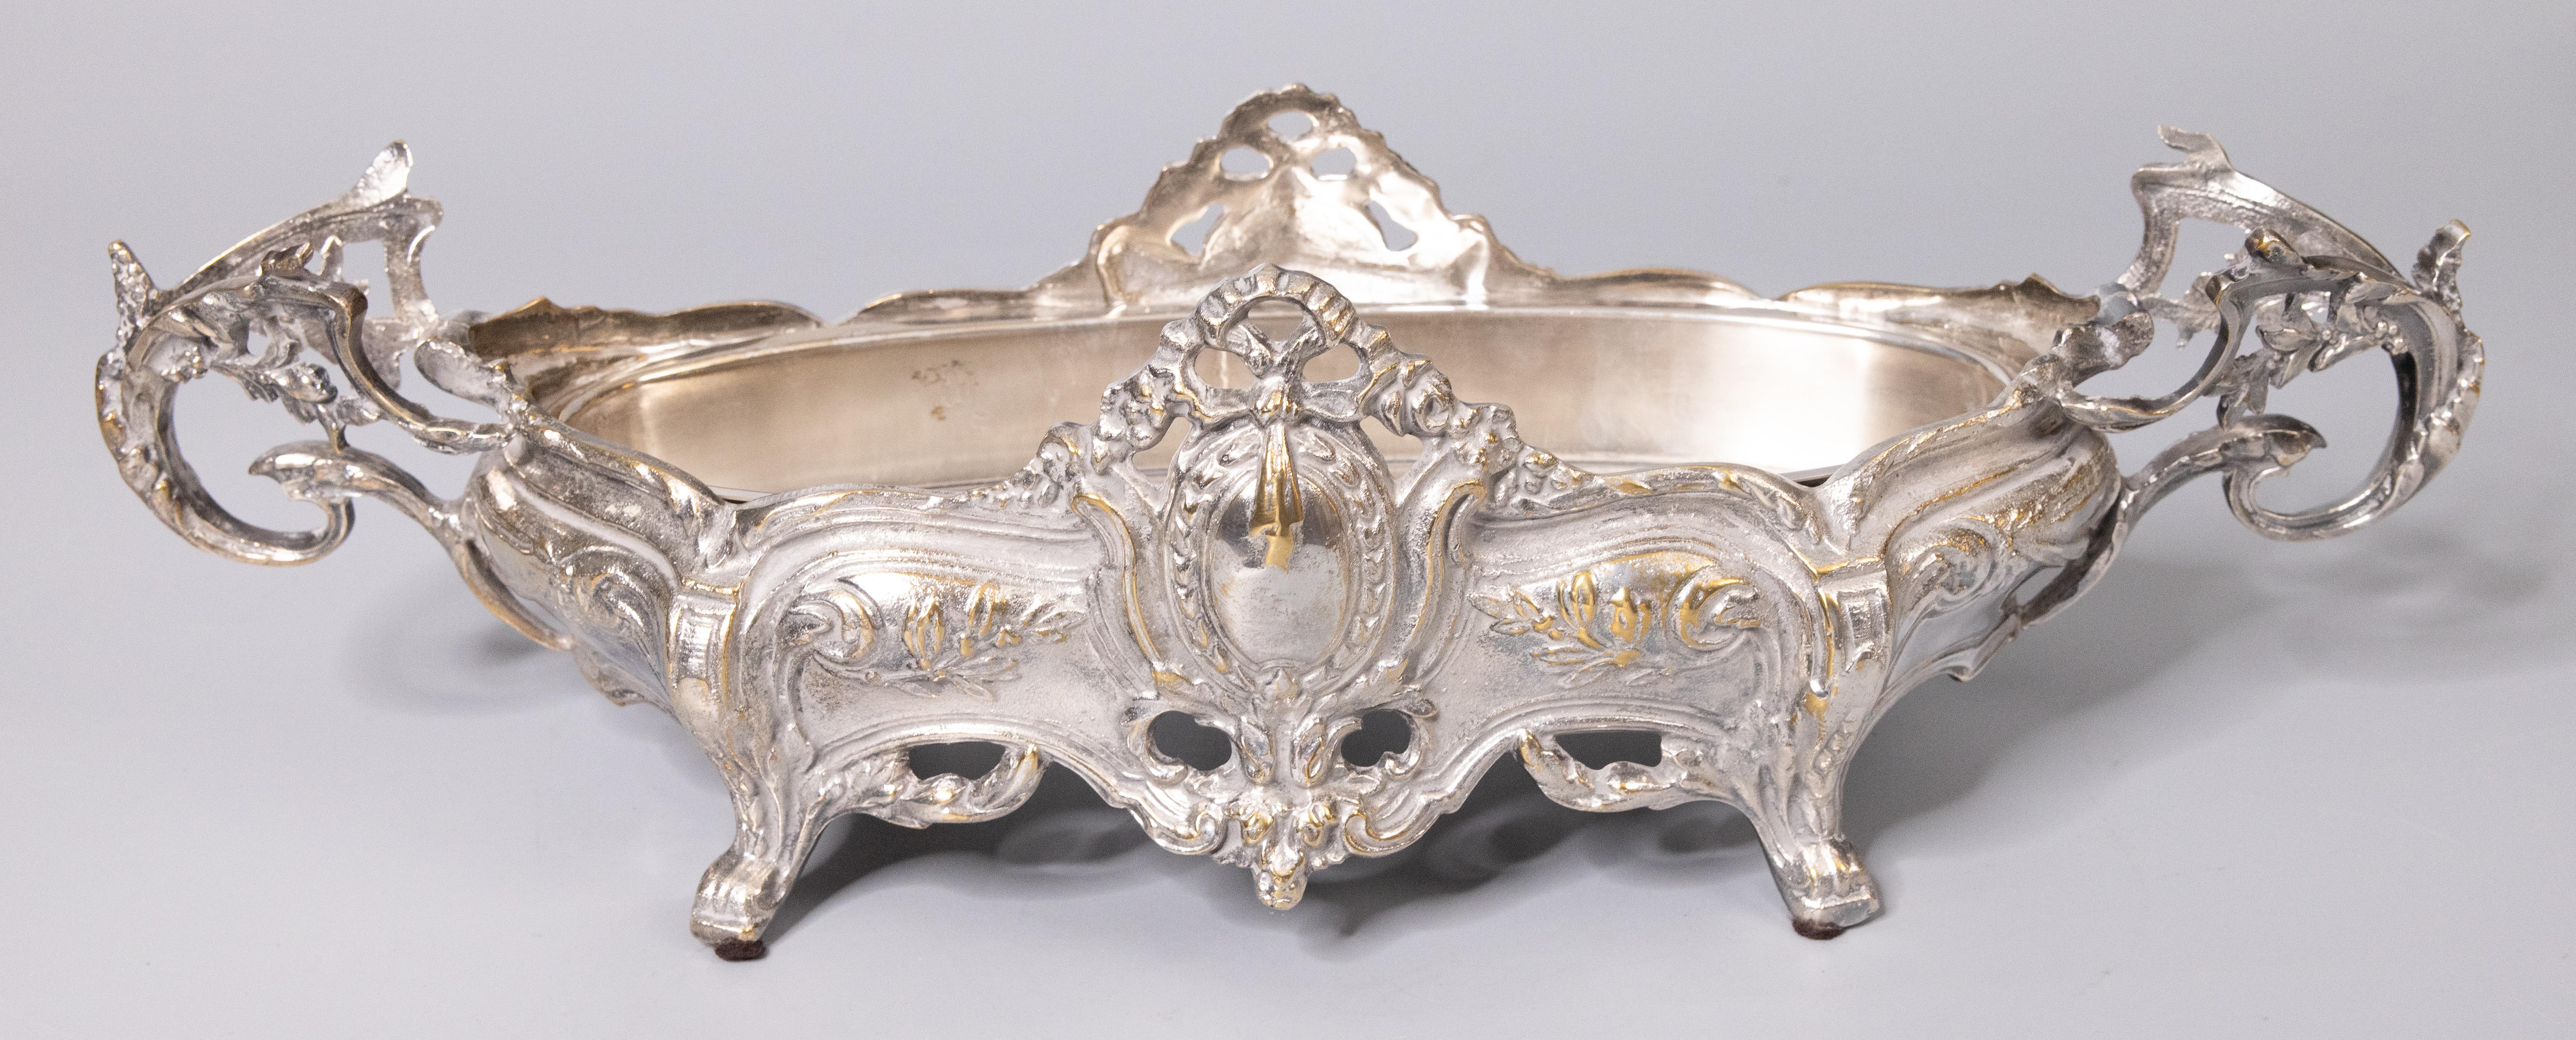 20th Century French Louis XV Style Silver Plate Jardiniere Cachepot Centerpiece circa 1900